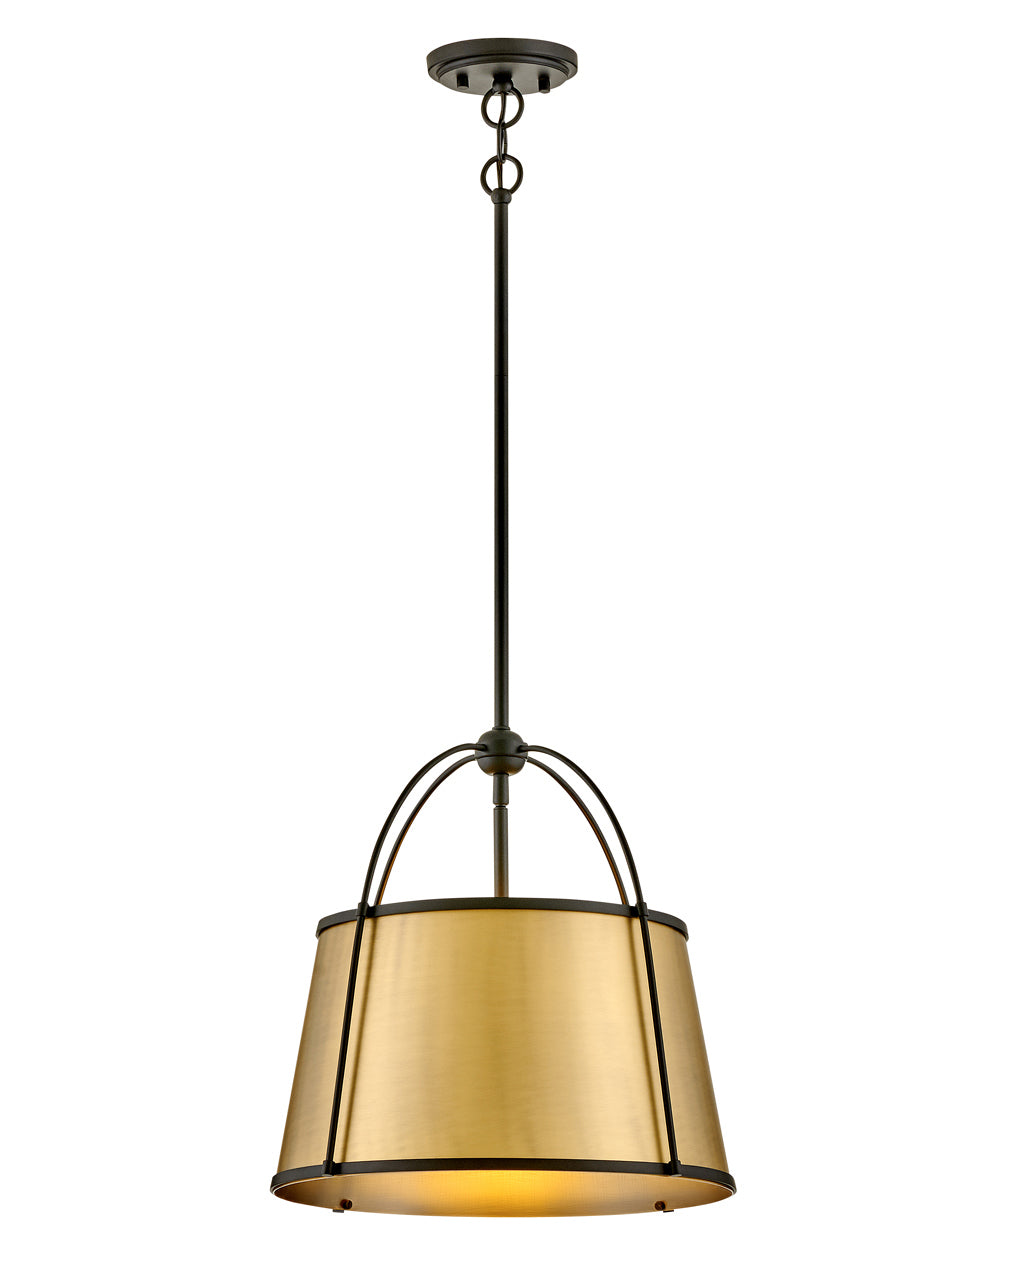 Hinkley Clarke Chandelier Chandeliers Hinkley Black with Lacquered Dark Brass accents 16.25x16.25x16.25 